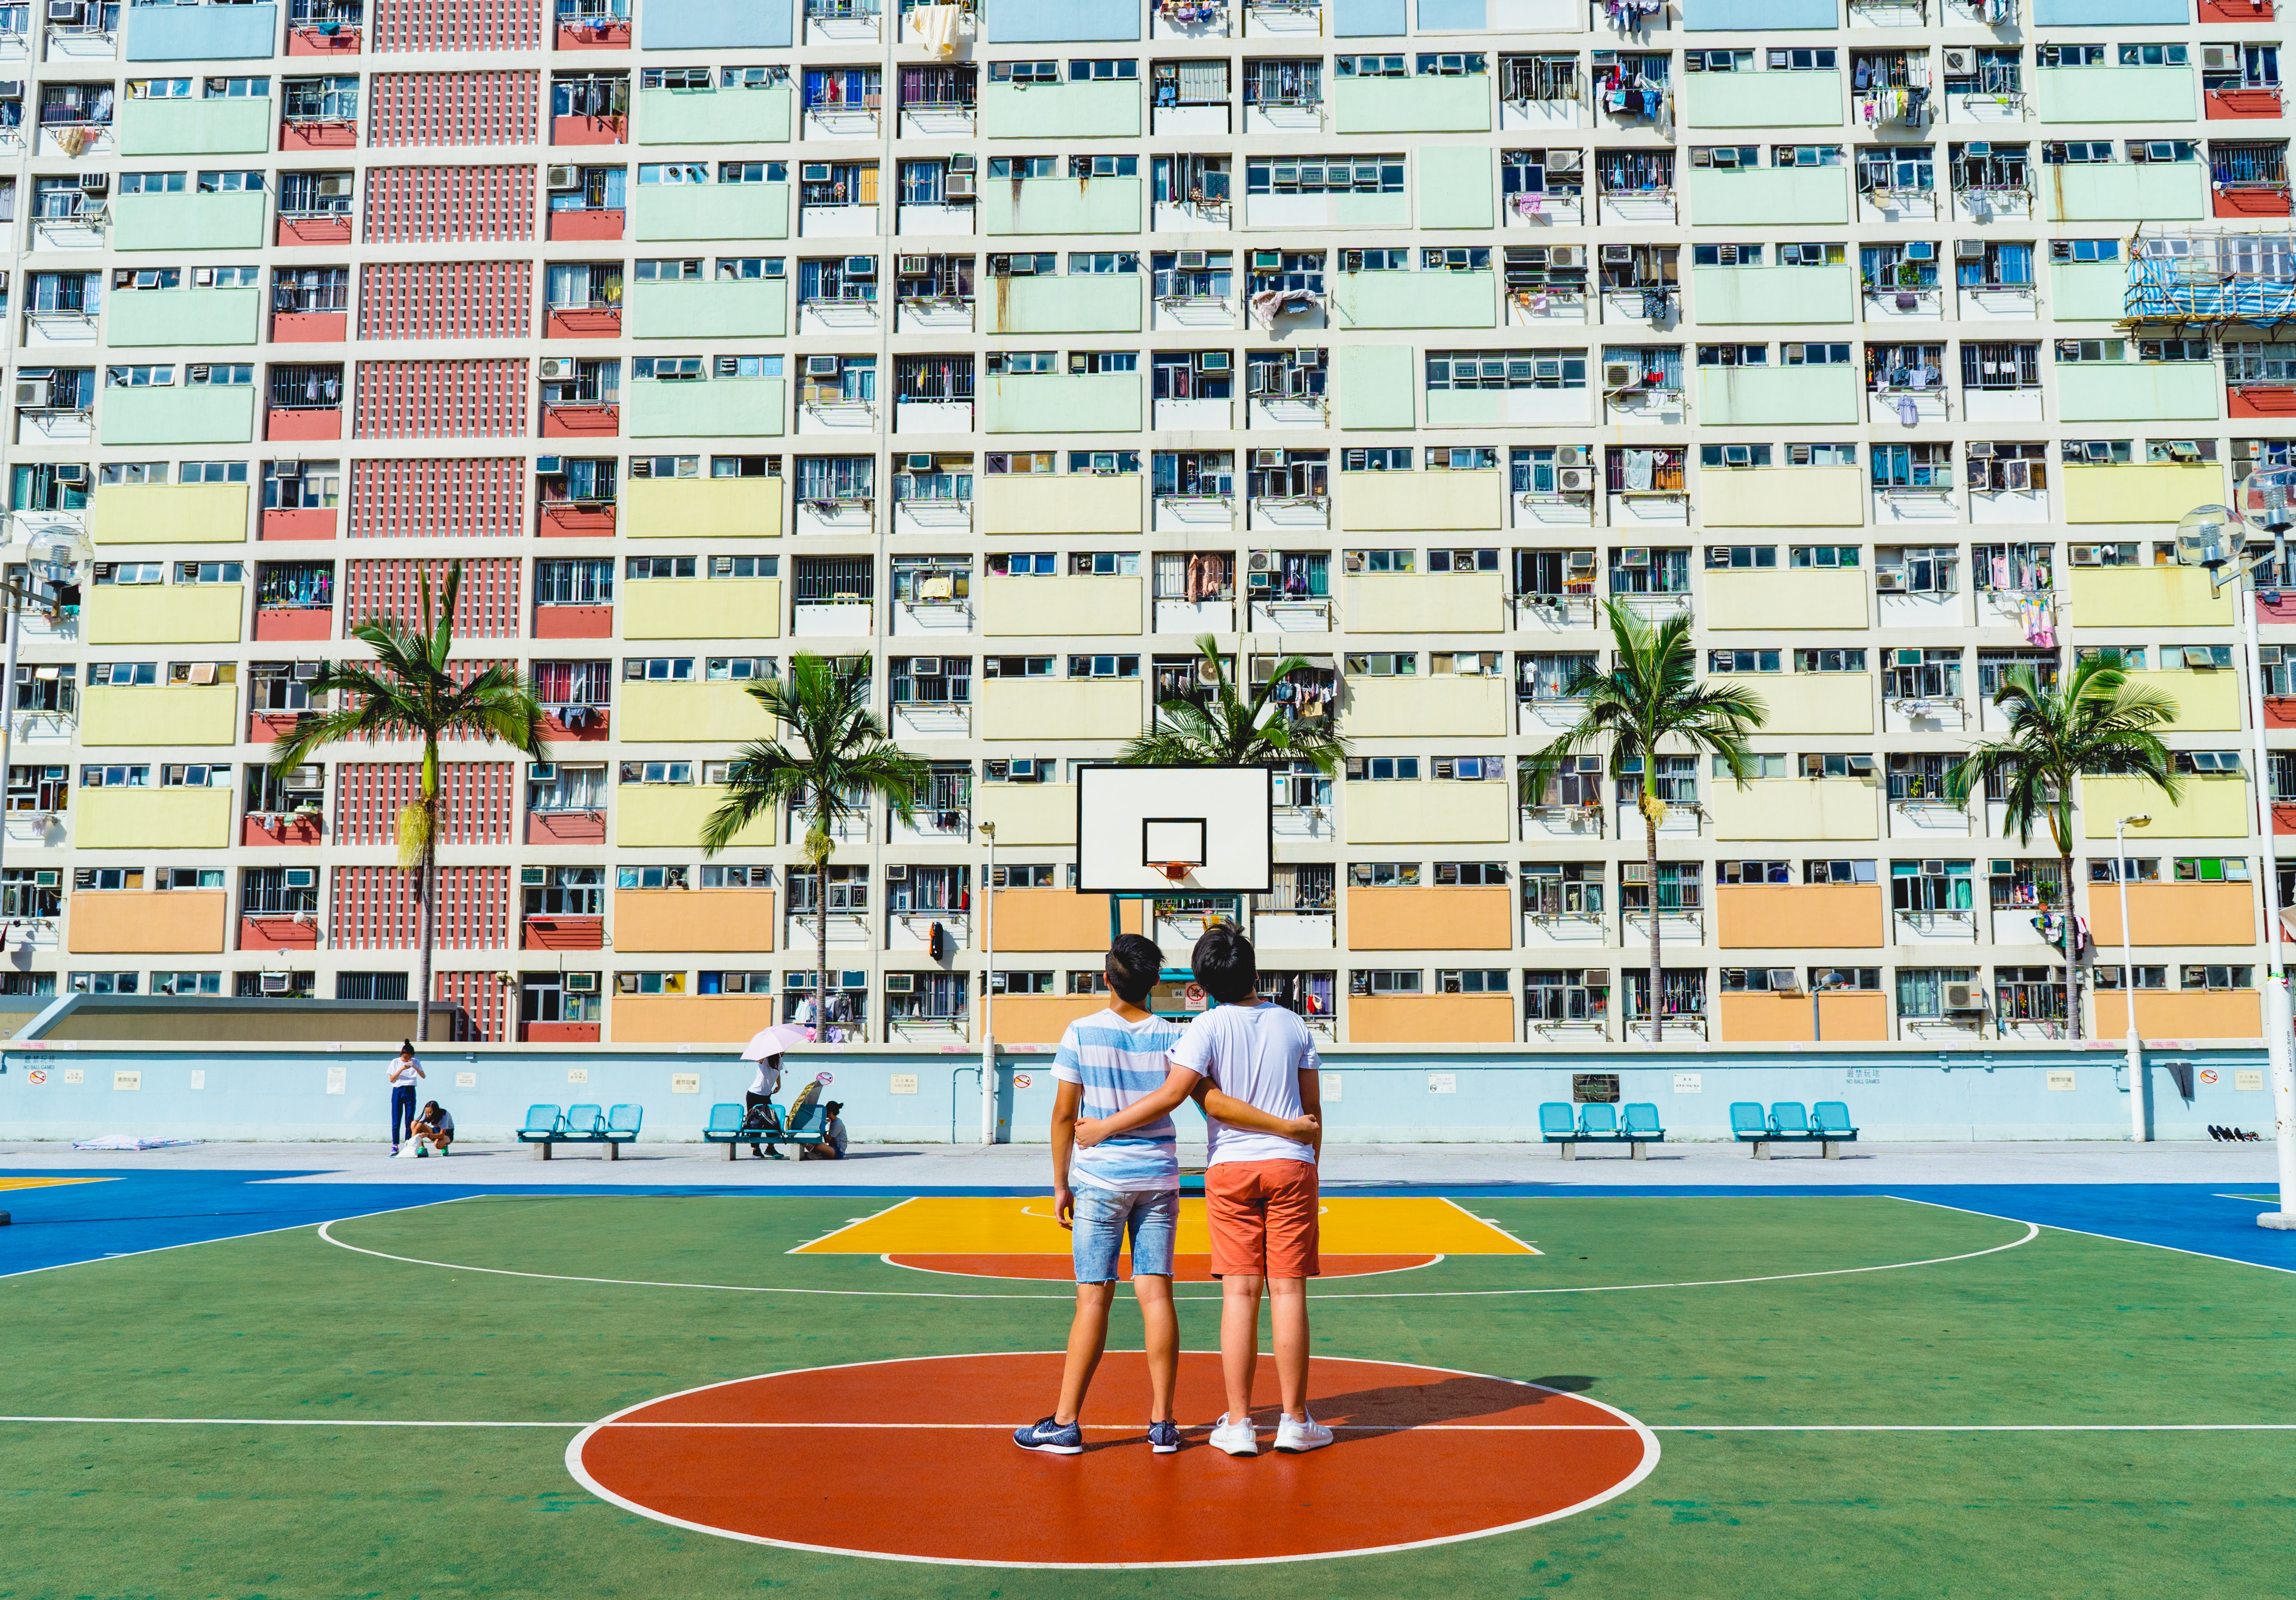 Friends Playing Basketball in a City